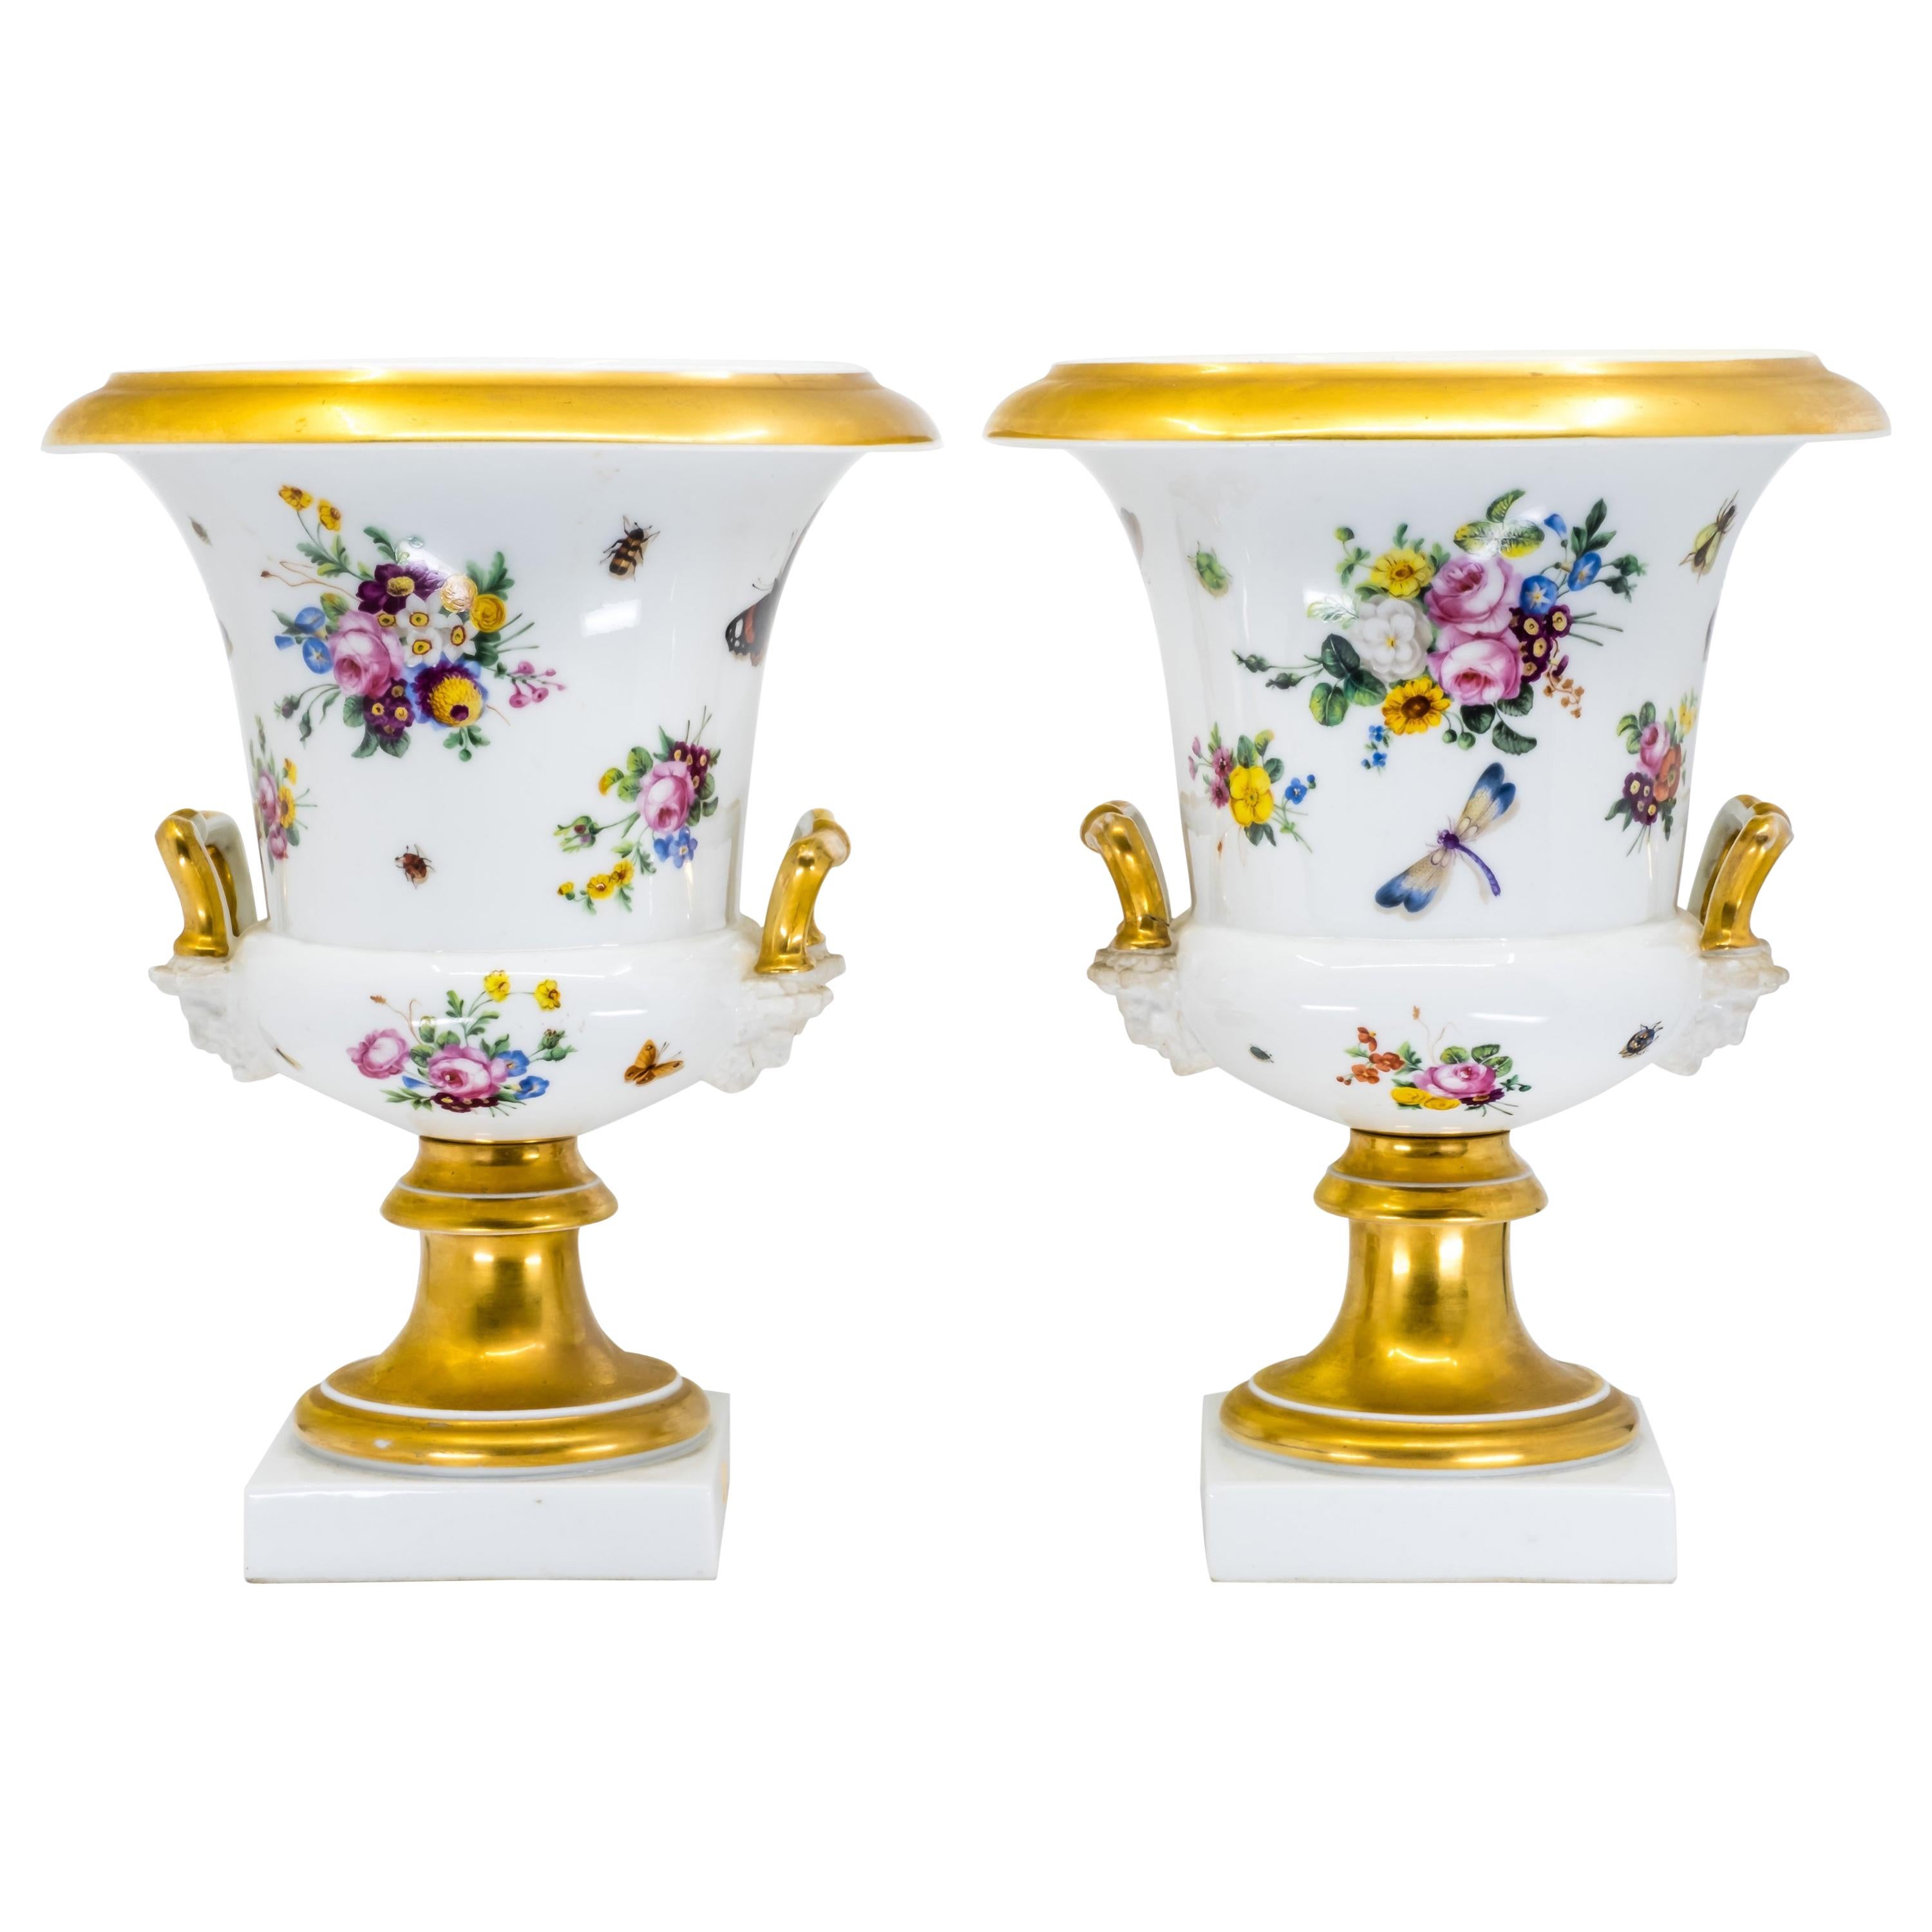 Pair of Medici Vases, Hand Painted Porcelain, French, 19th Century For Sale